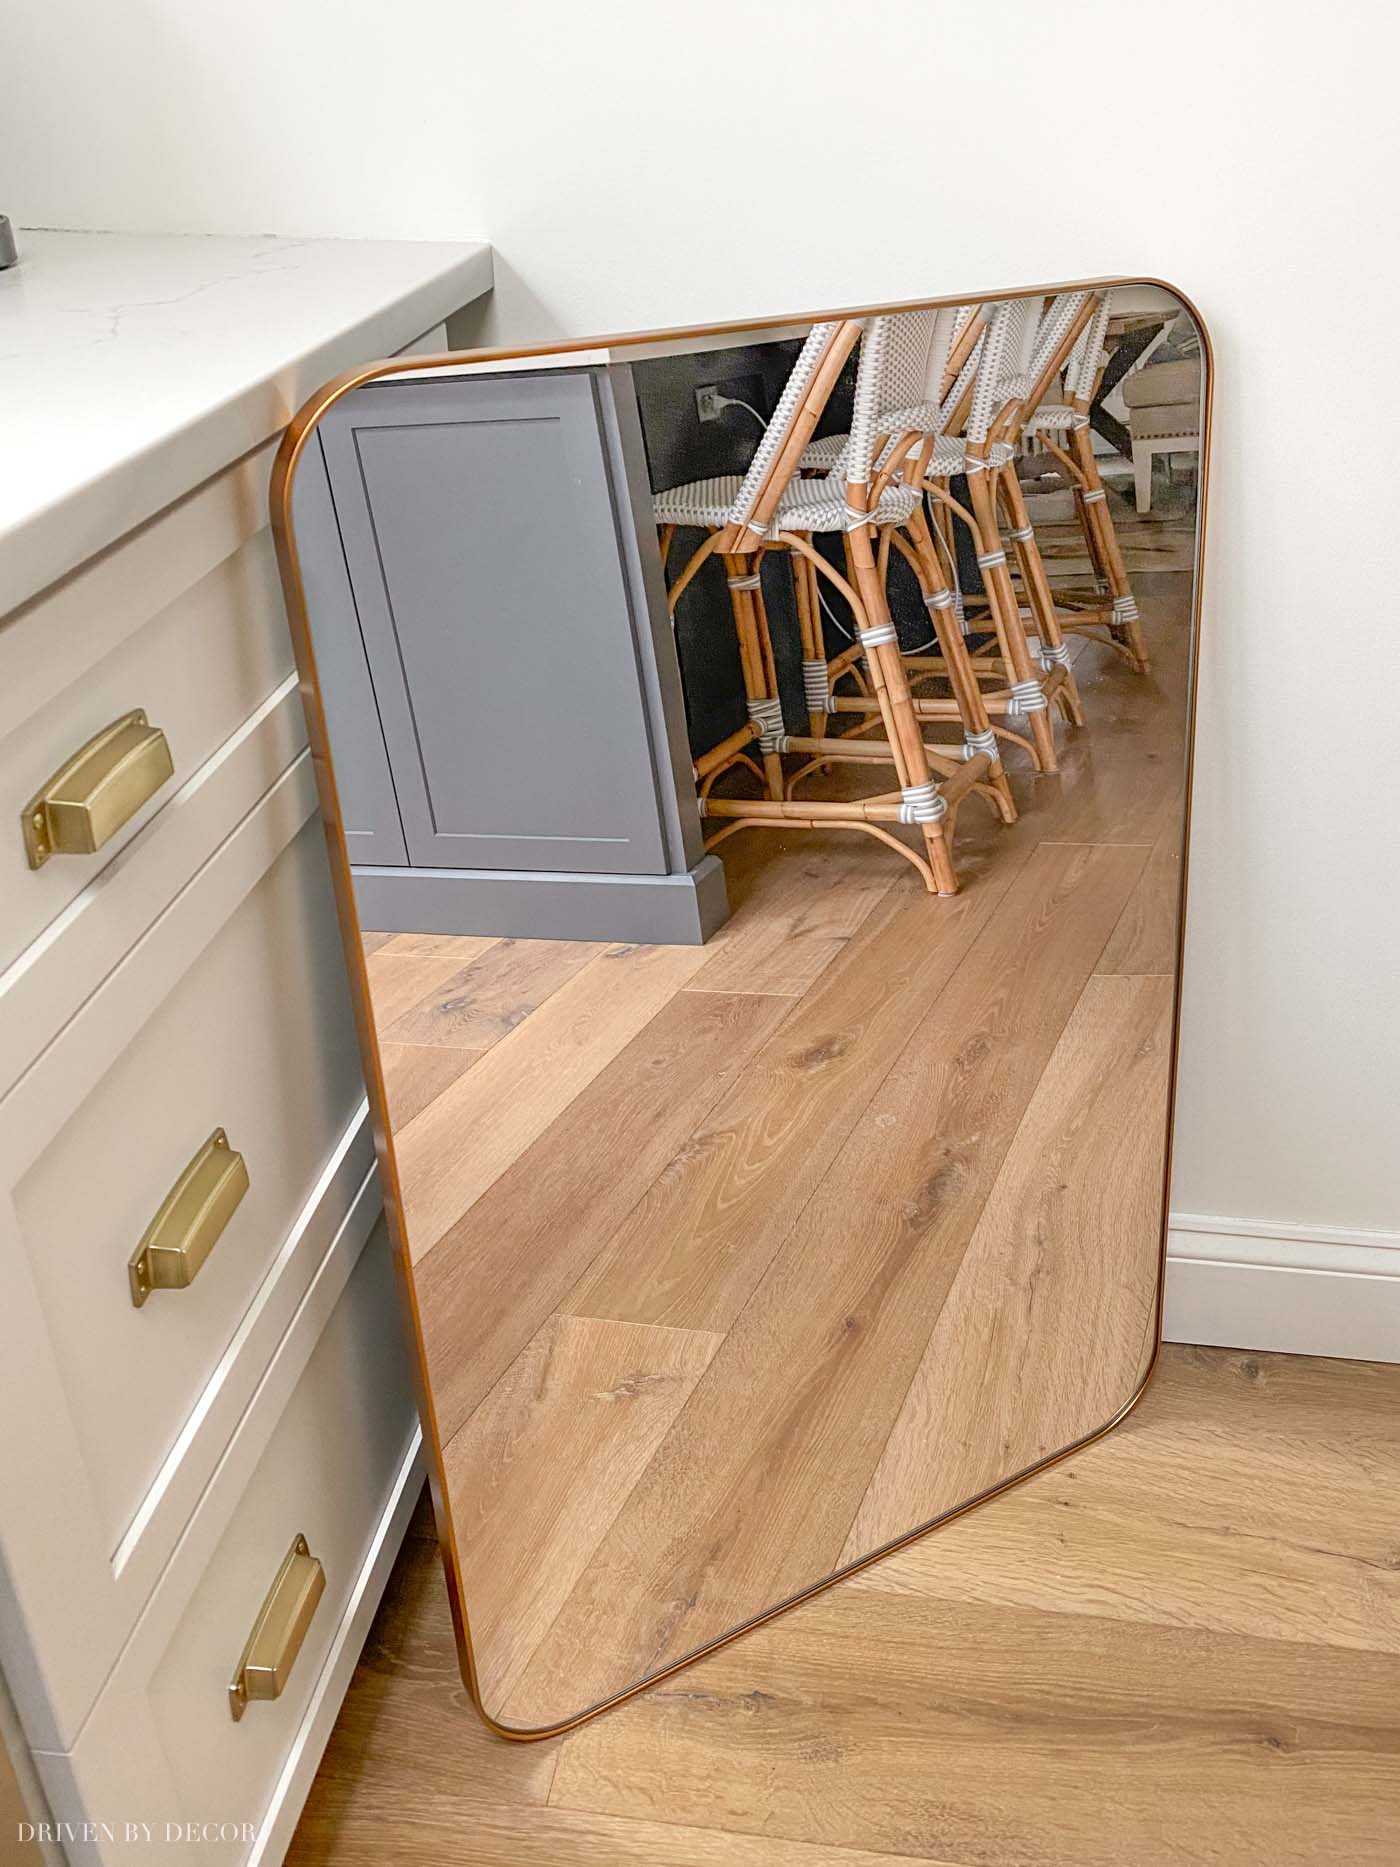 The perfect mirrors for above a bathroom sink - love the curved edges!